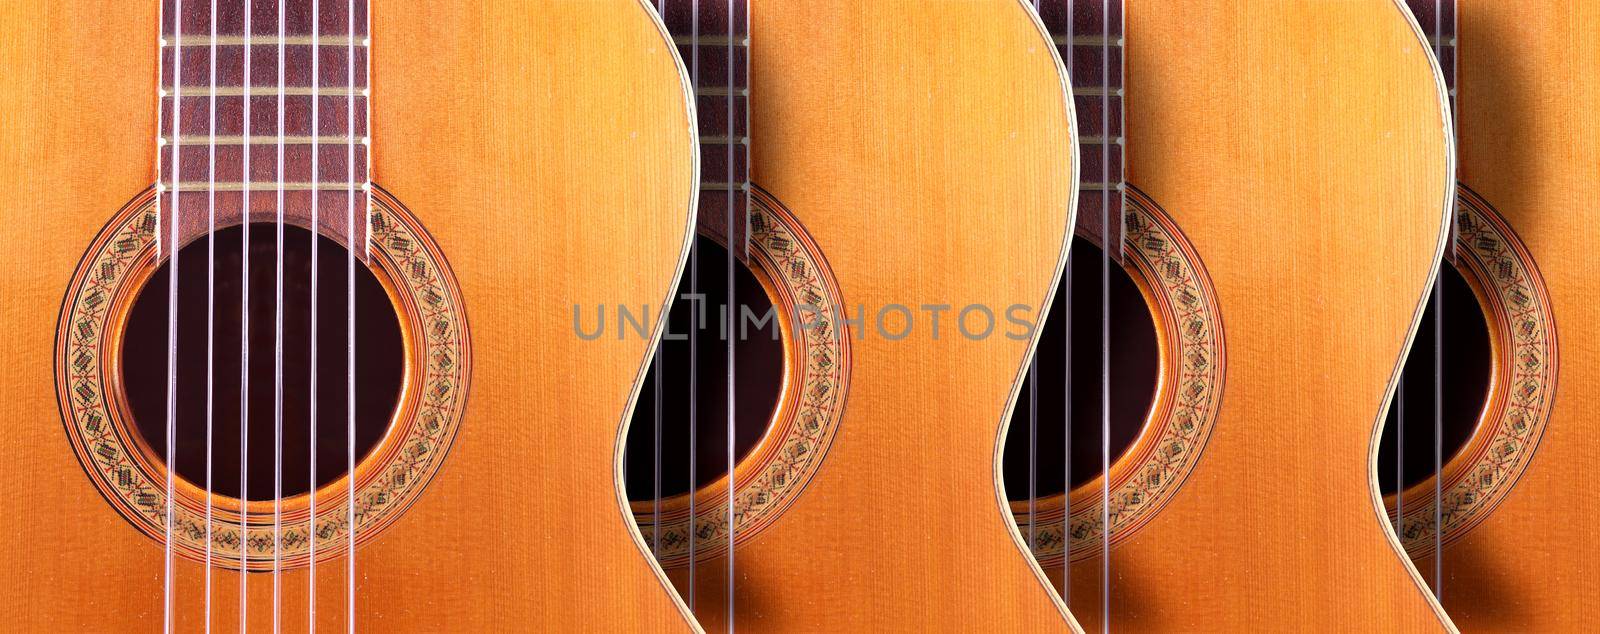 Musical design with acoustic guitar by carloscastilla